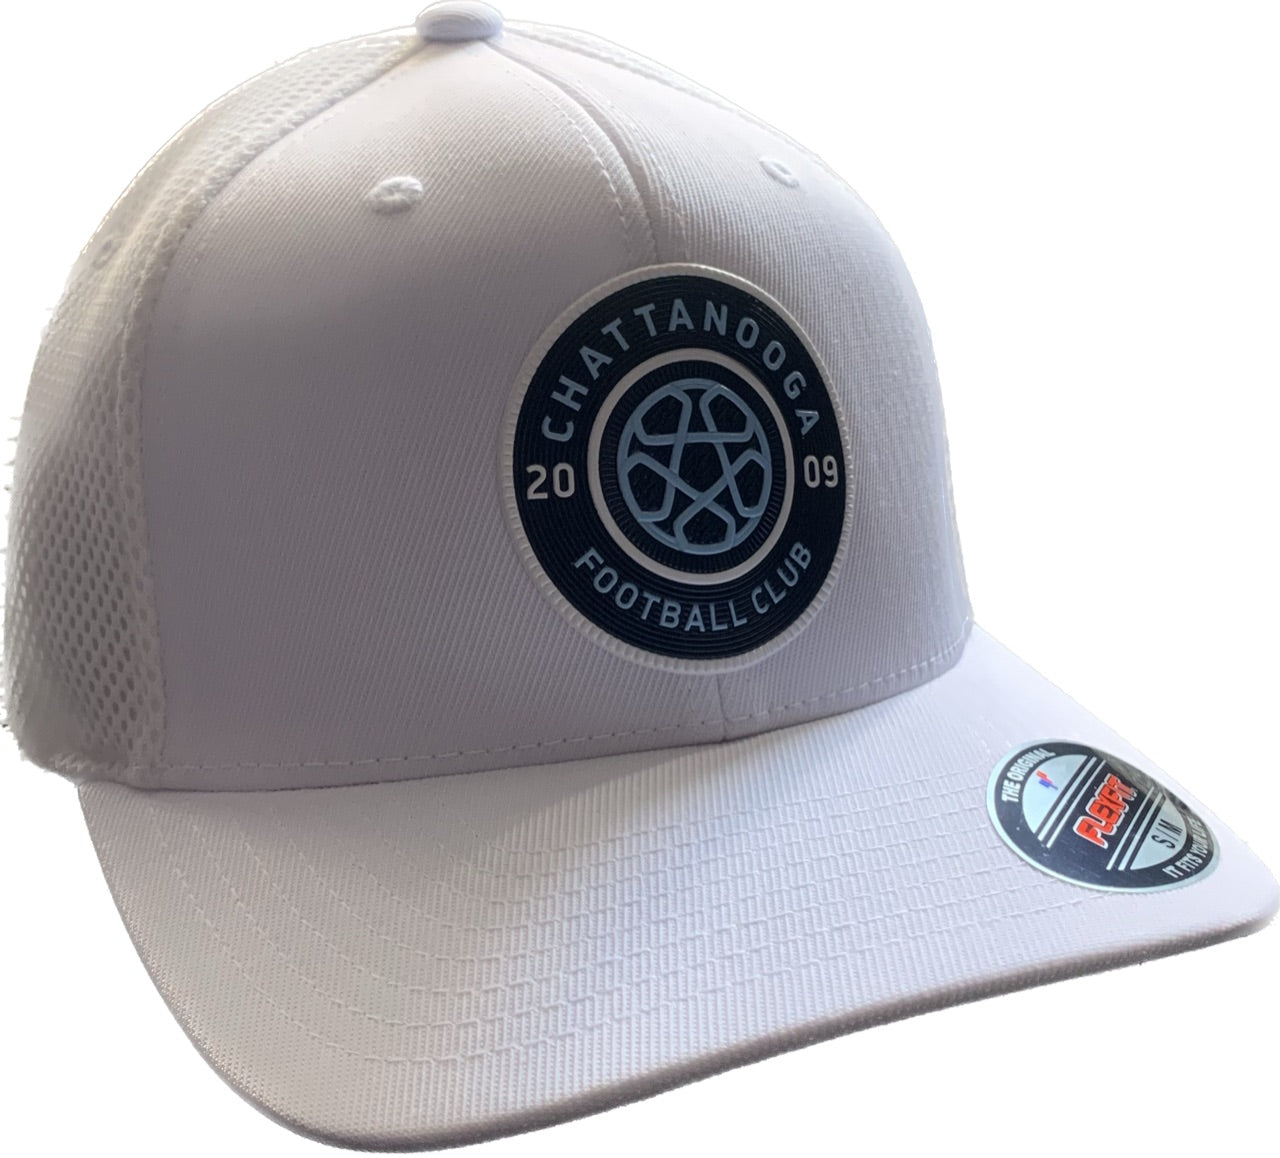 Flex FC Fit at Shop Chattanooga The Cap – (White/White)